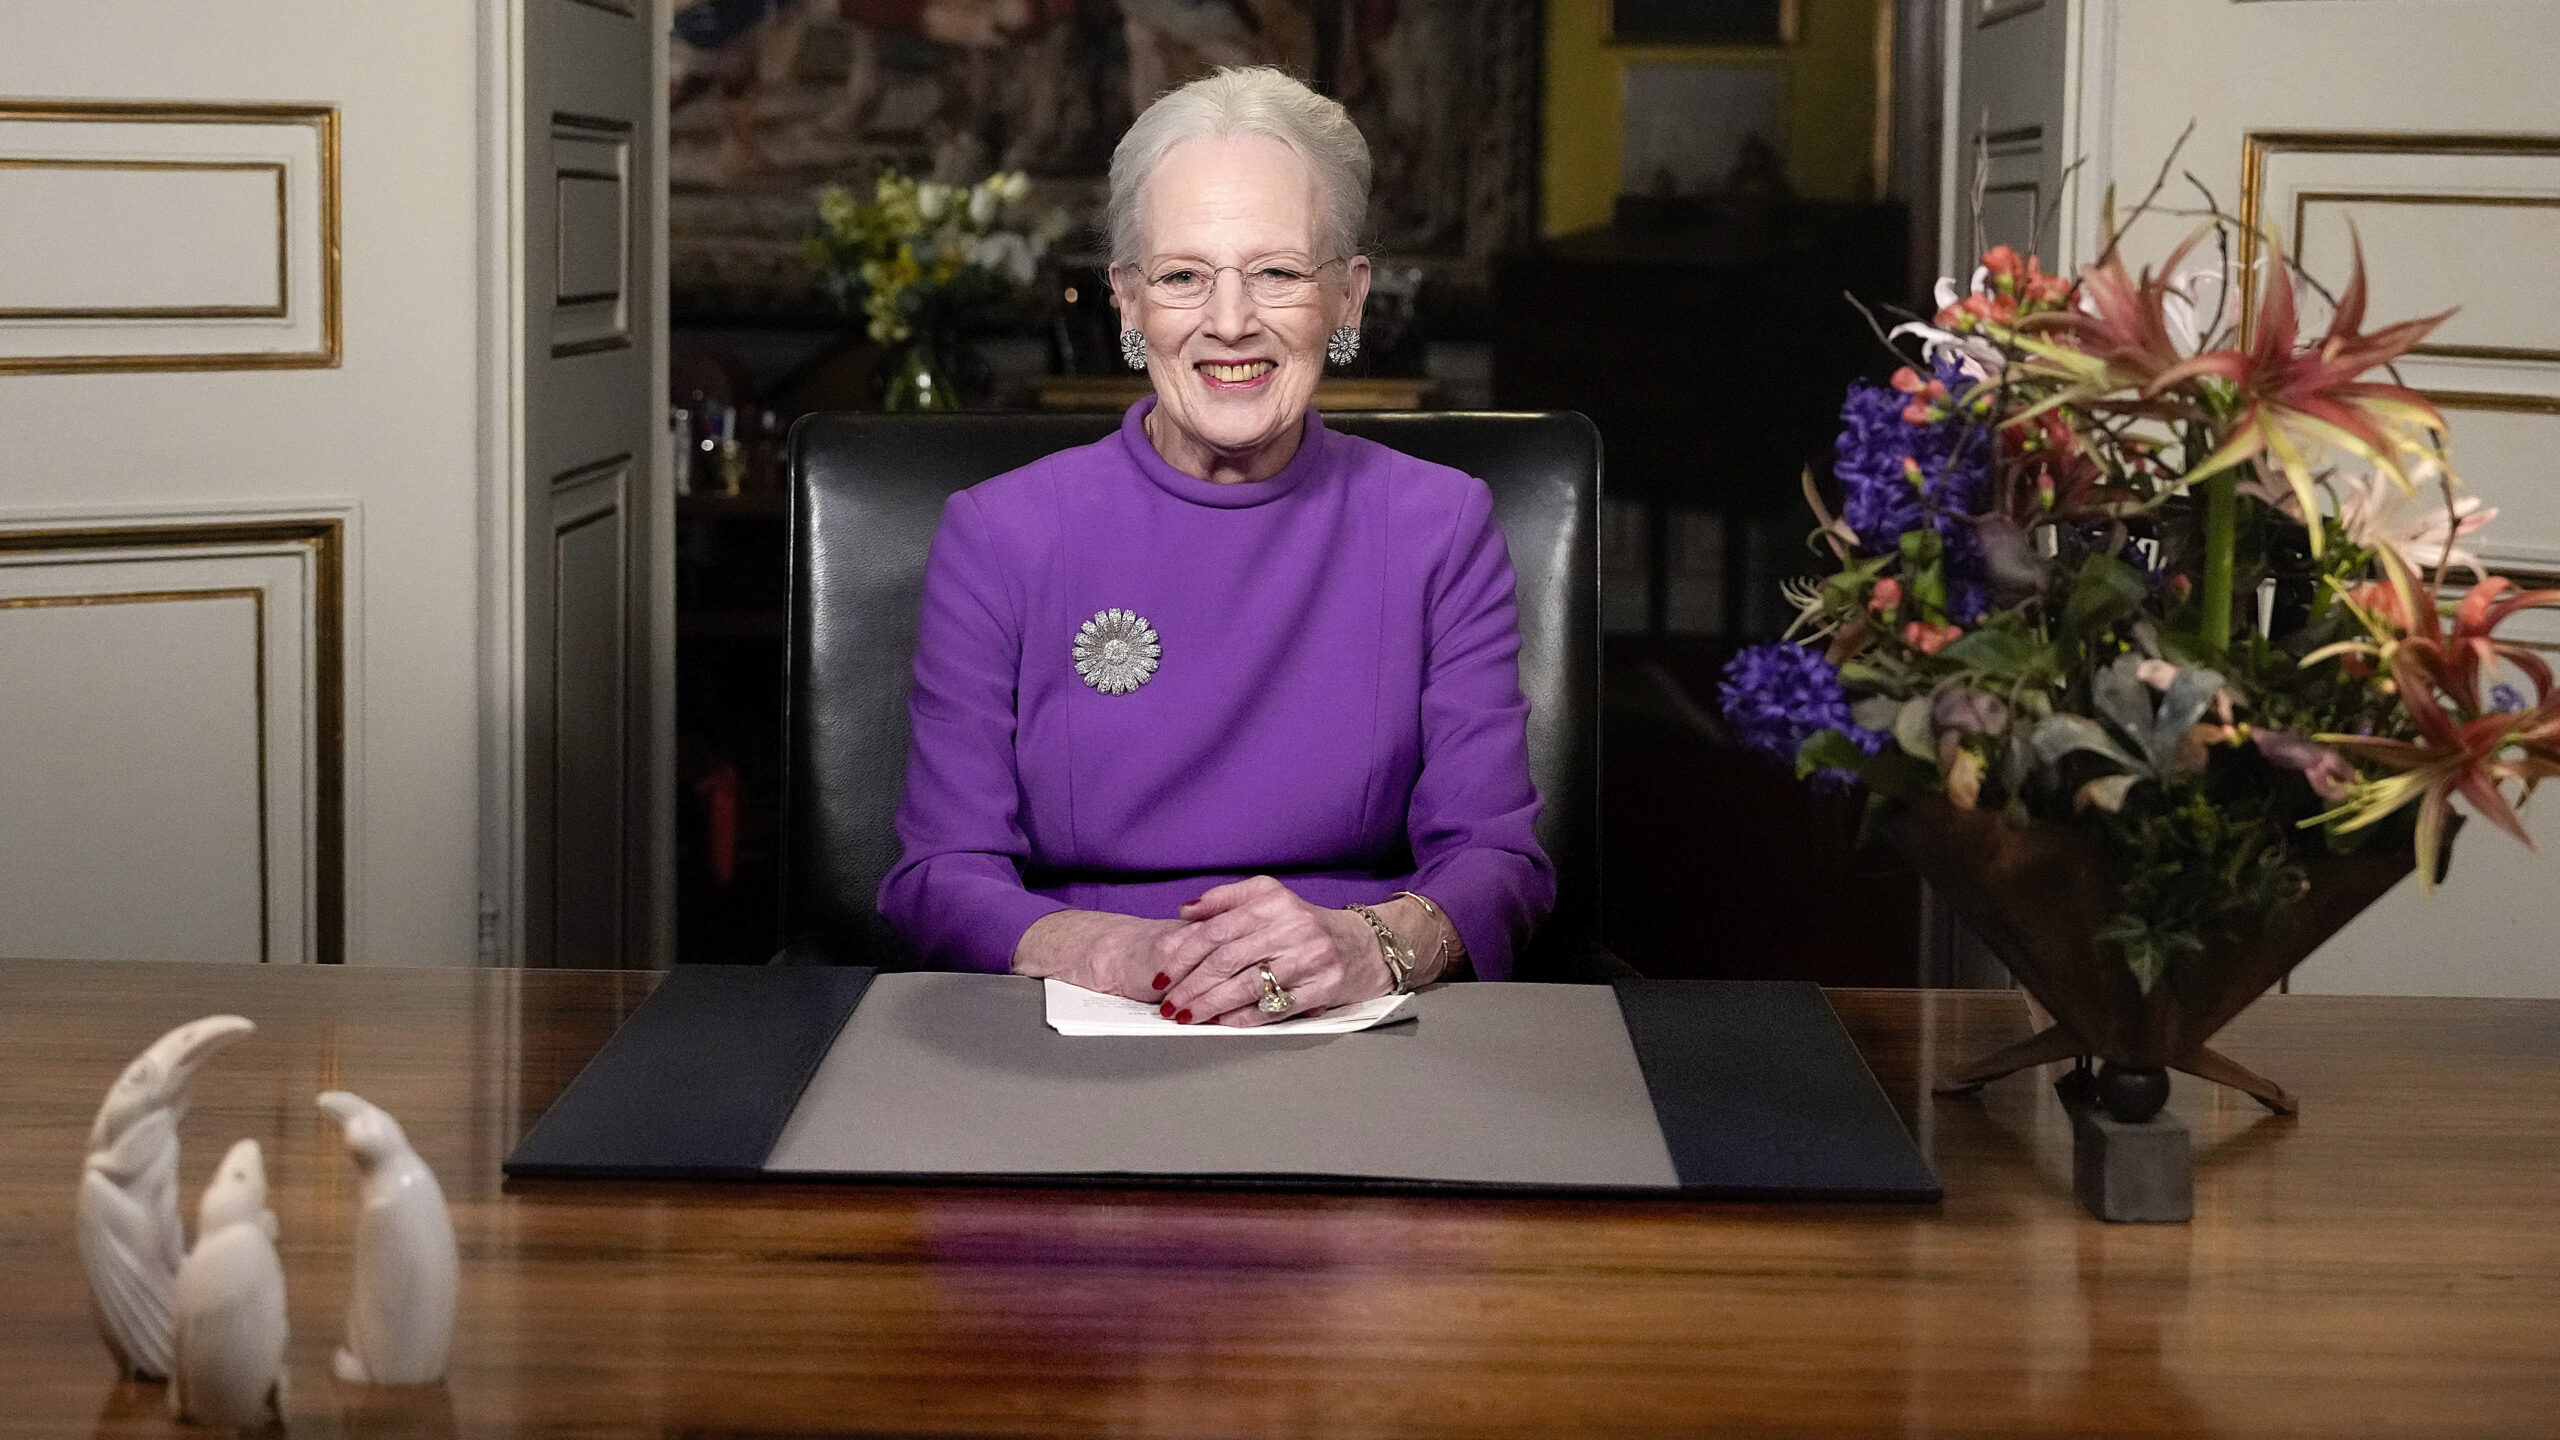 Denmark’s Queen Margrethe II to step down on Jan. 14 after 50 years on the throne